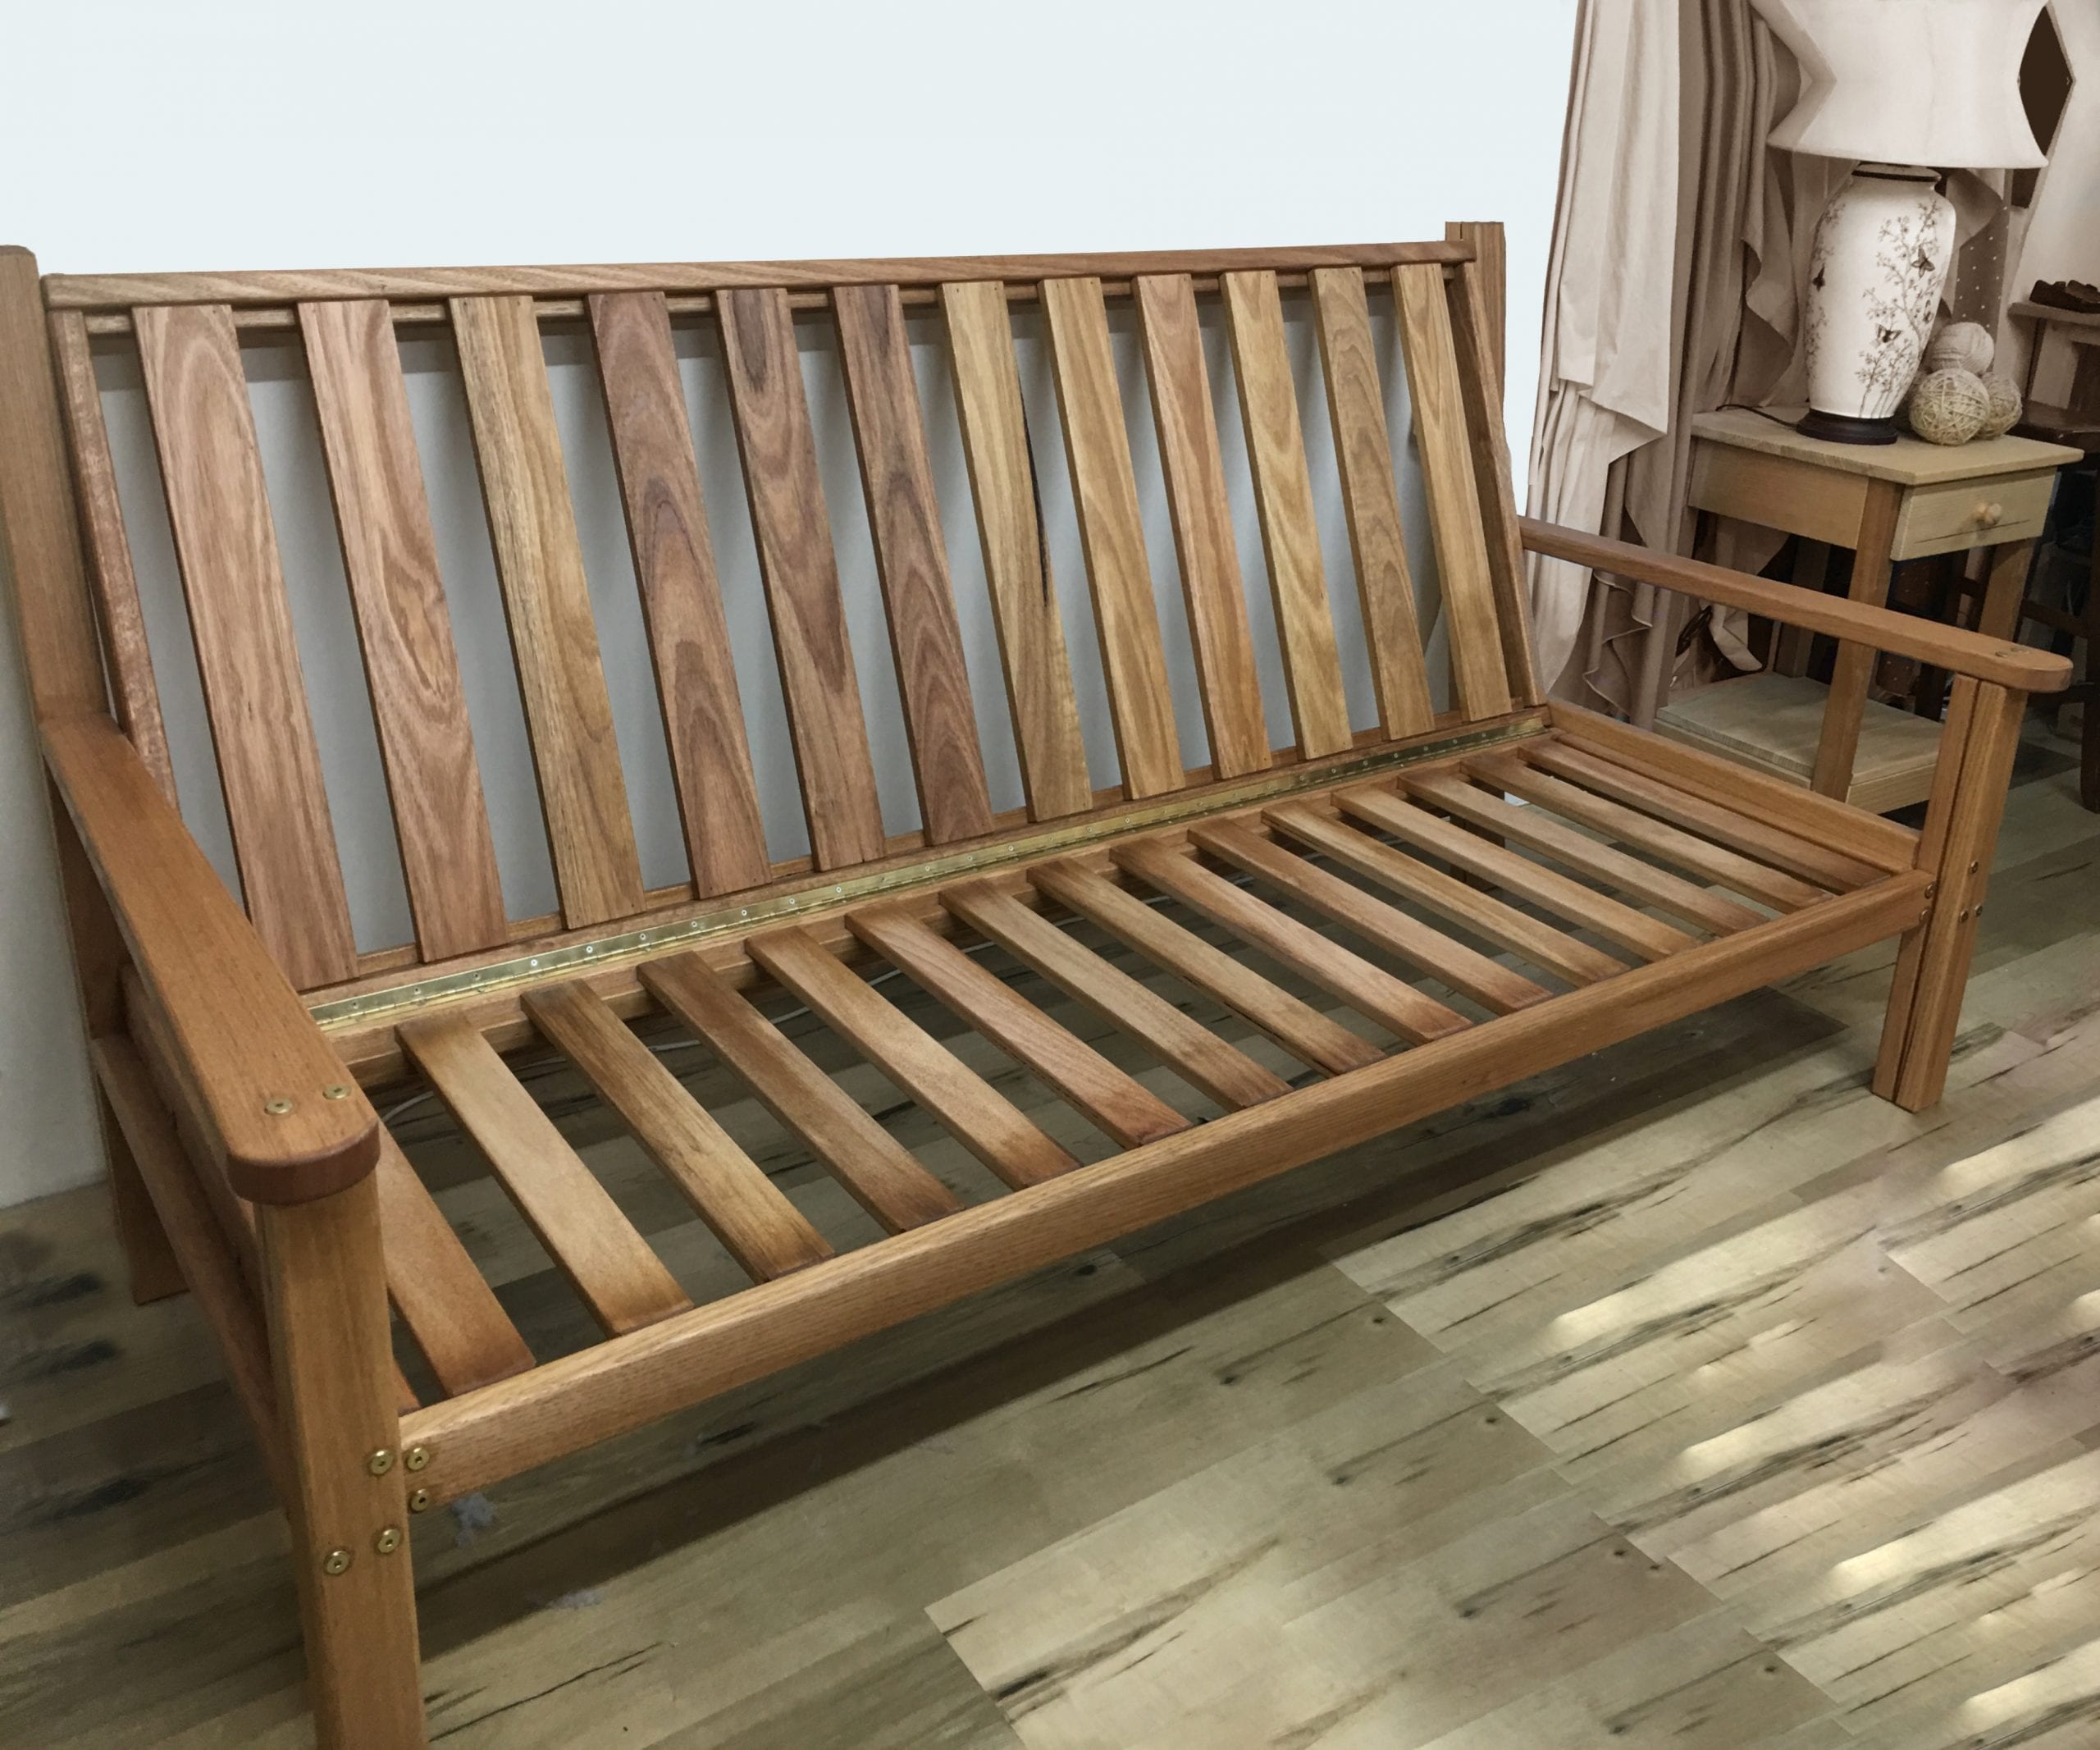 wooden frame double sofa bed